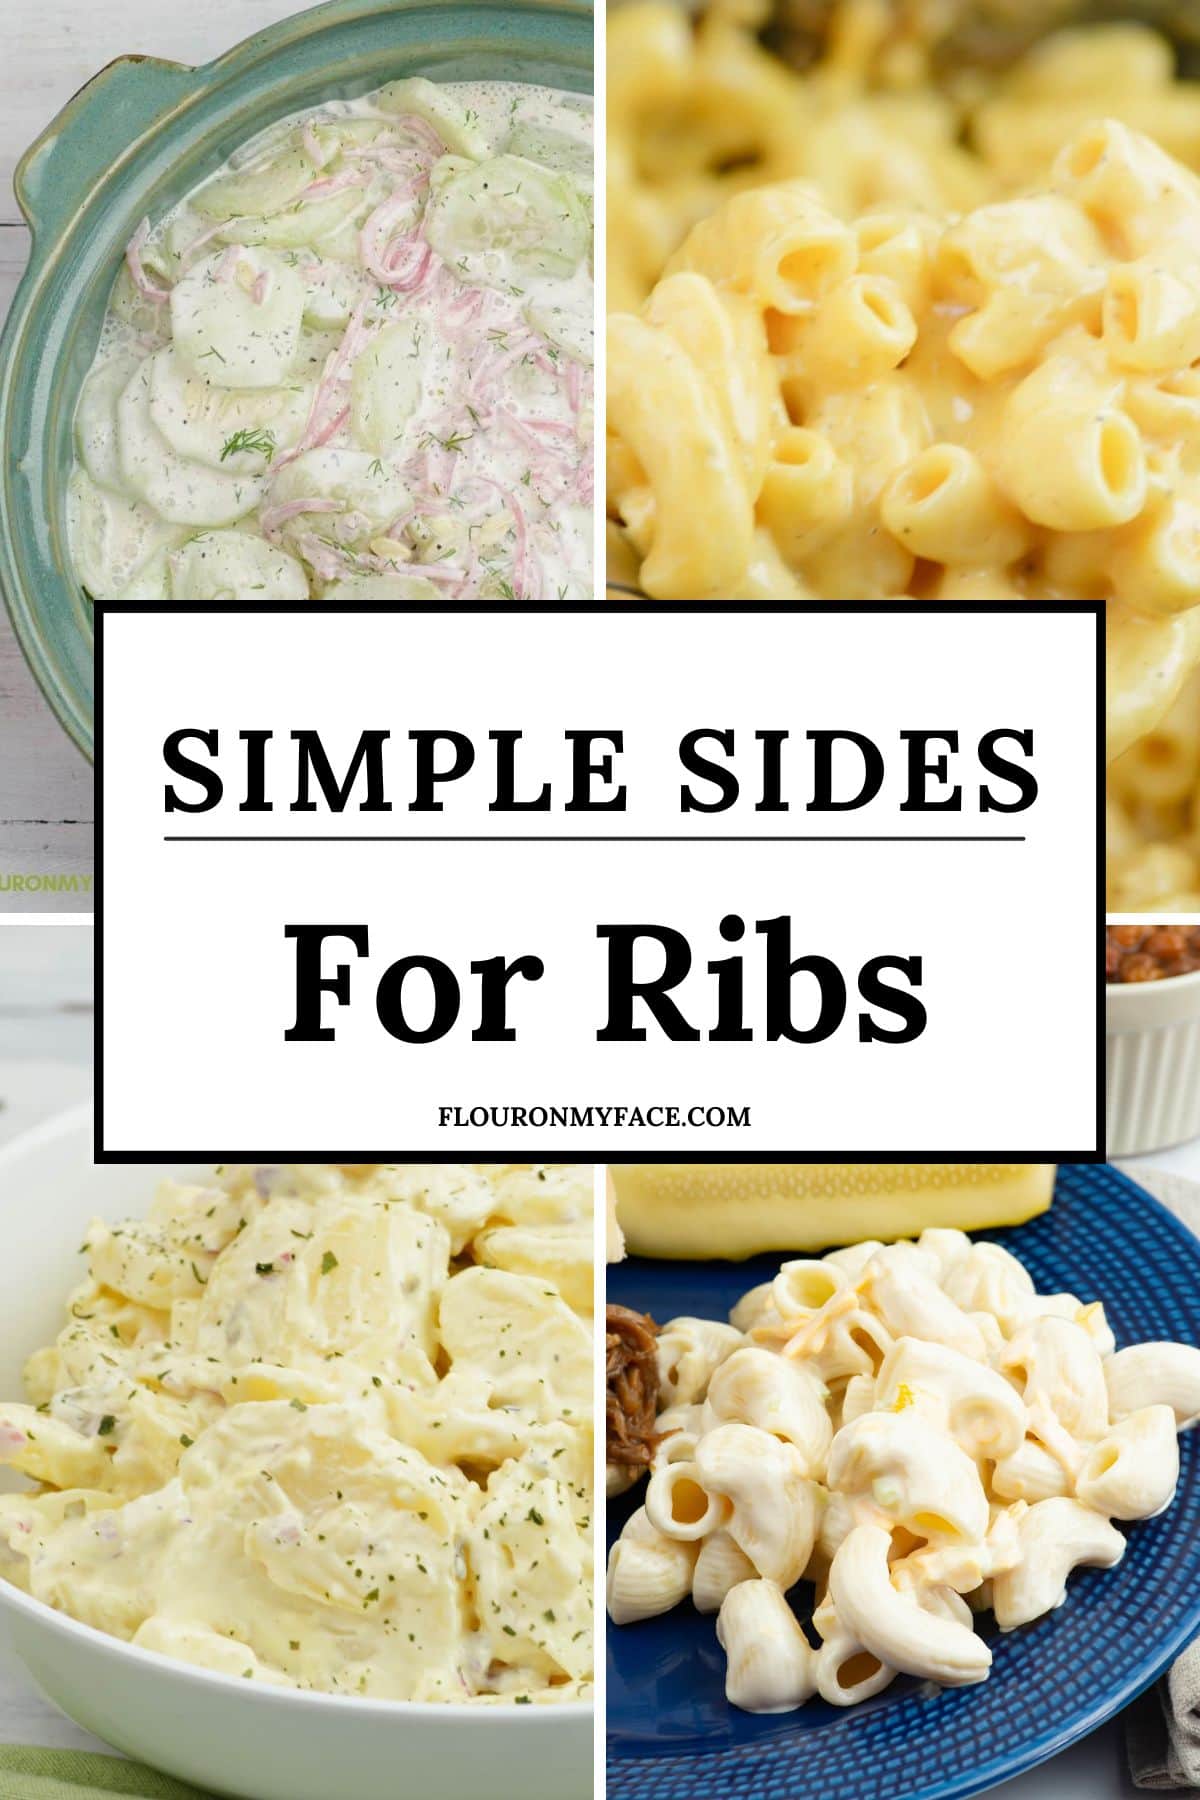 Simple Side Recipes for Ribs large featured image.